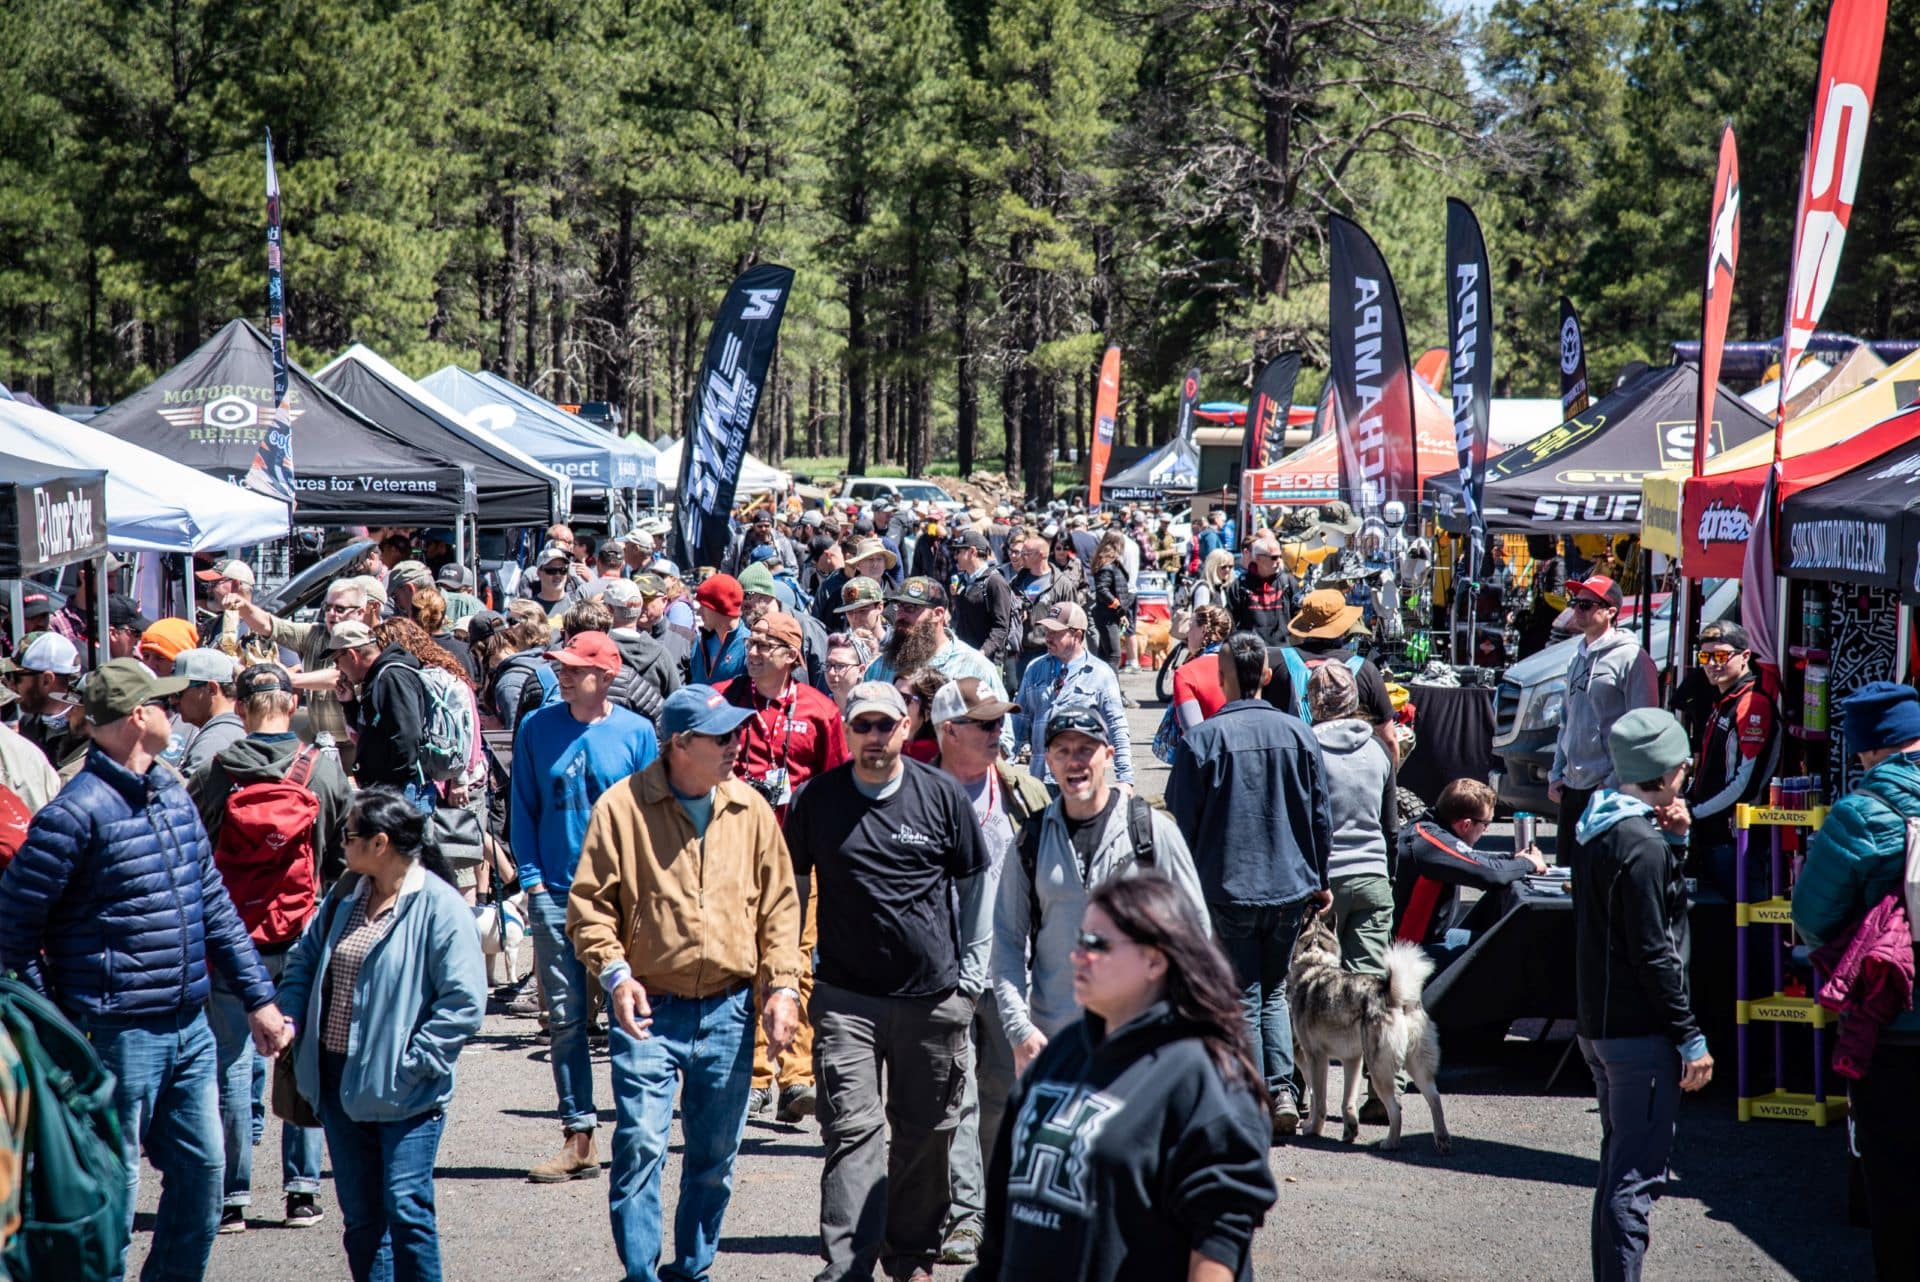 Emerald Acquires Lodestone Events, Producers of The Overland Expo Series